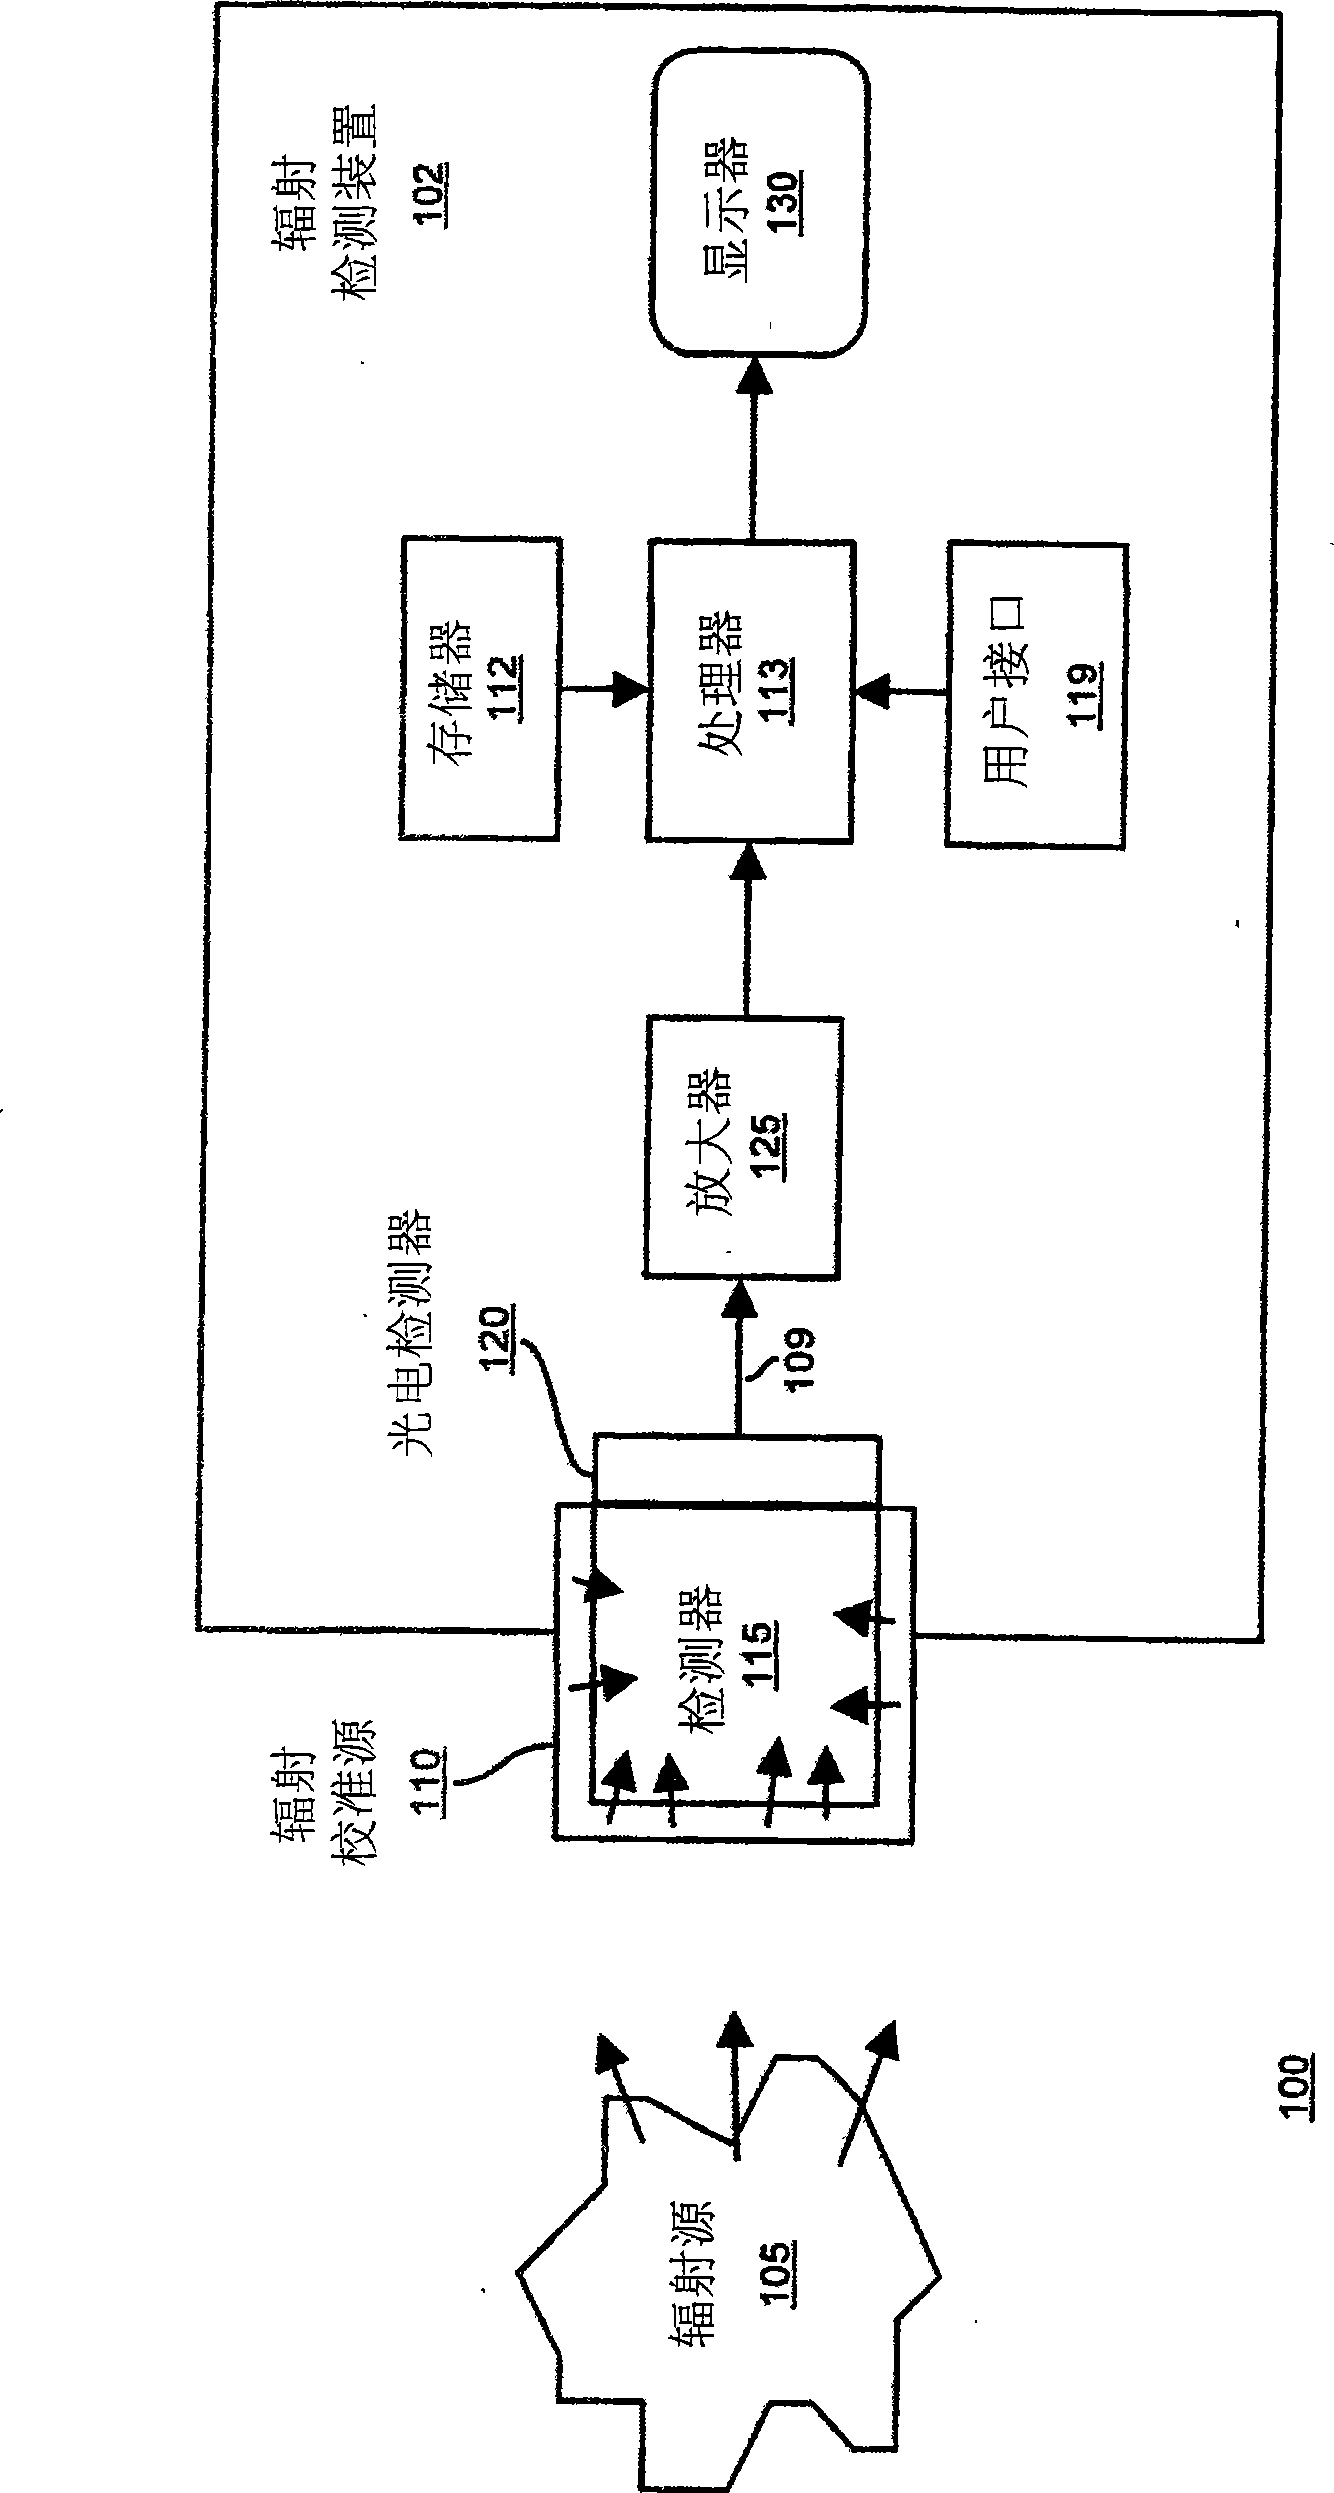 Methods and apparatus for performance verification and stabilization of radiation detection devices